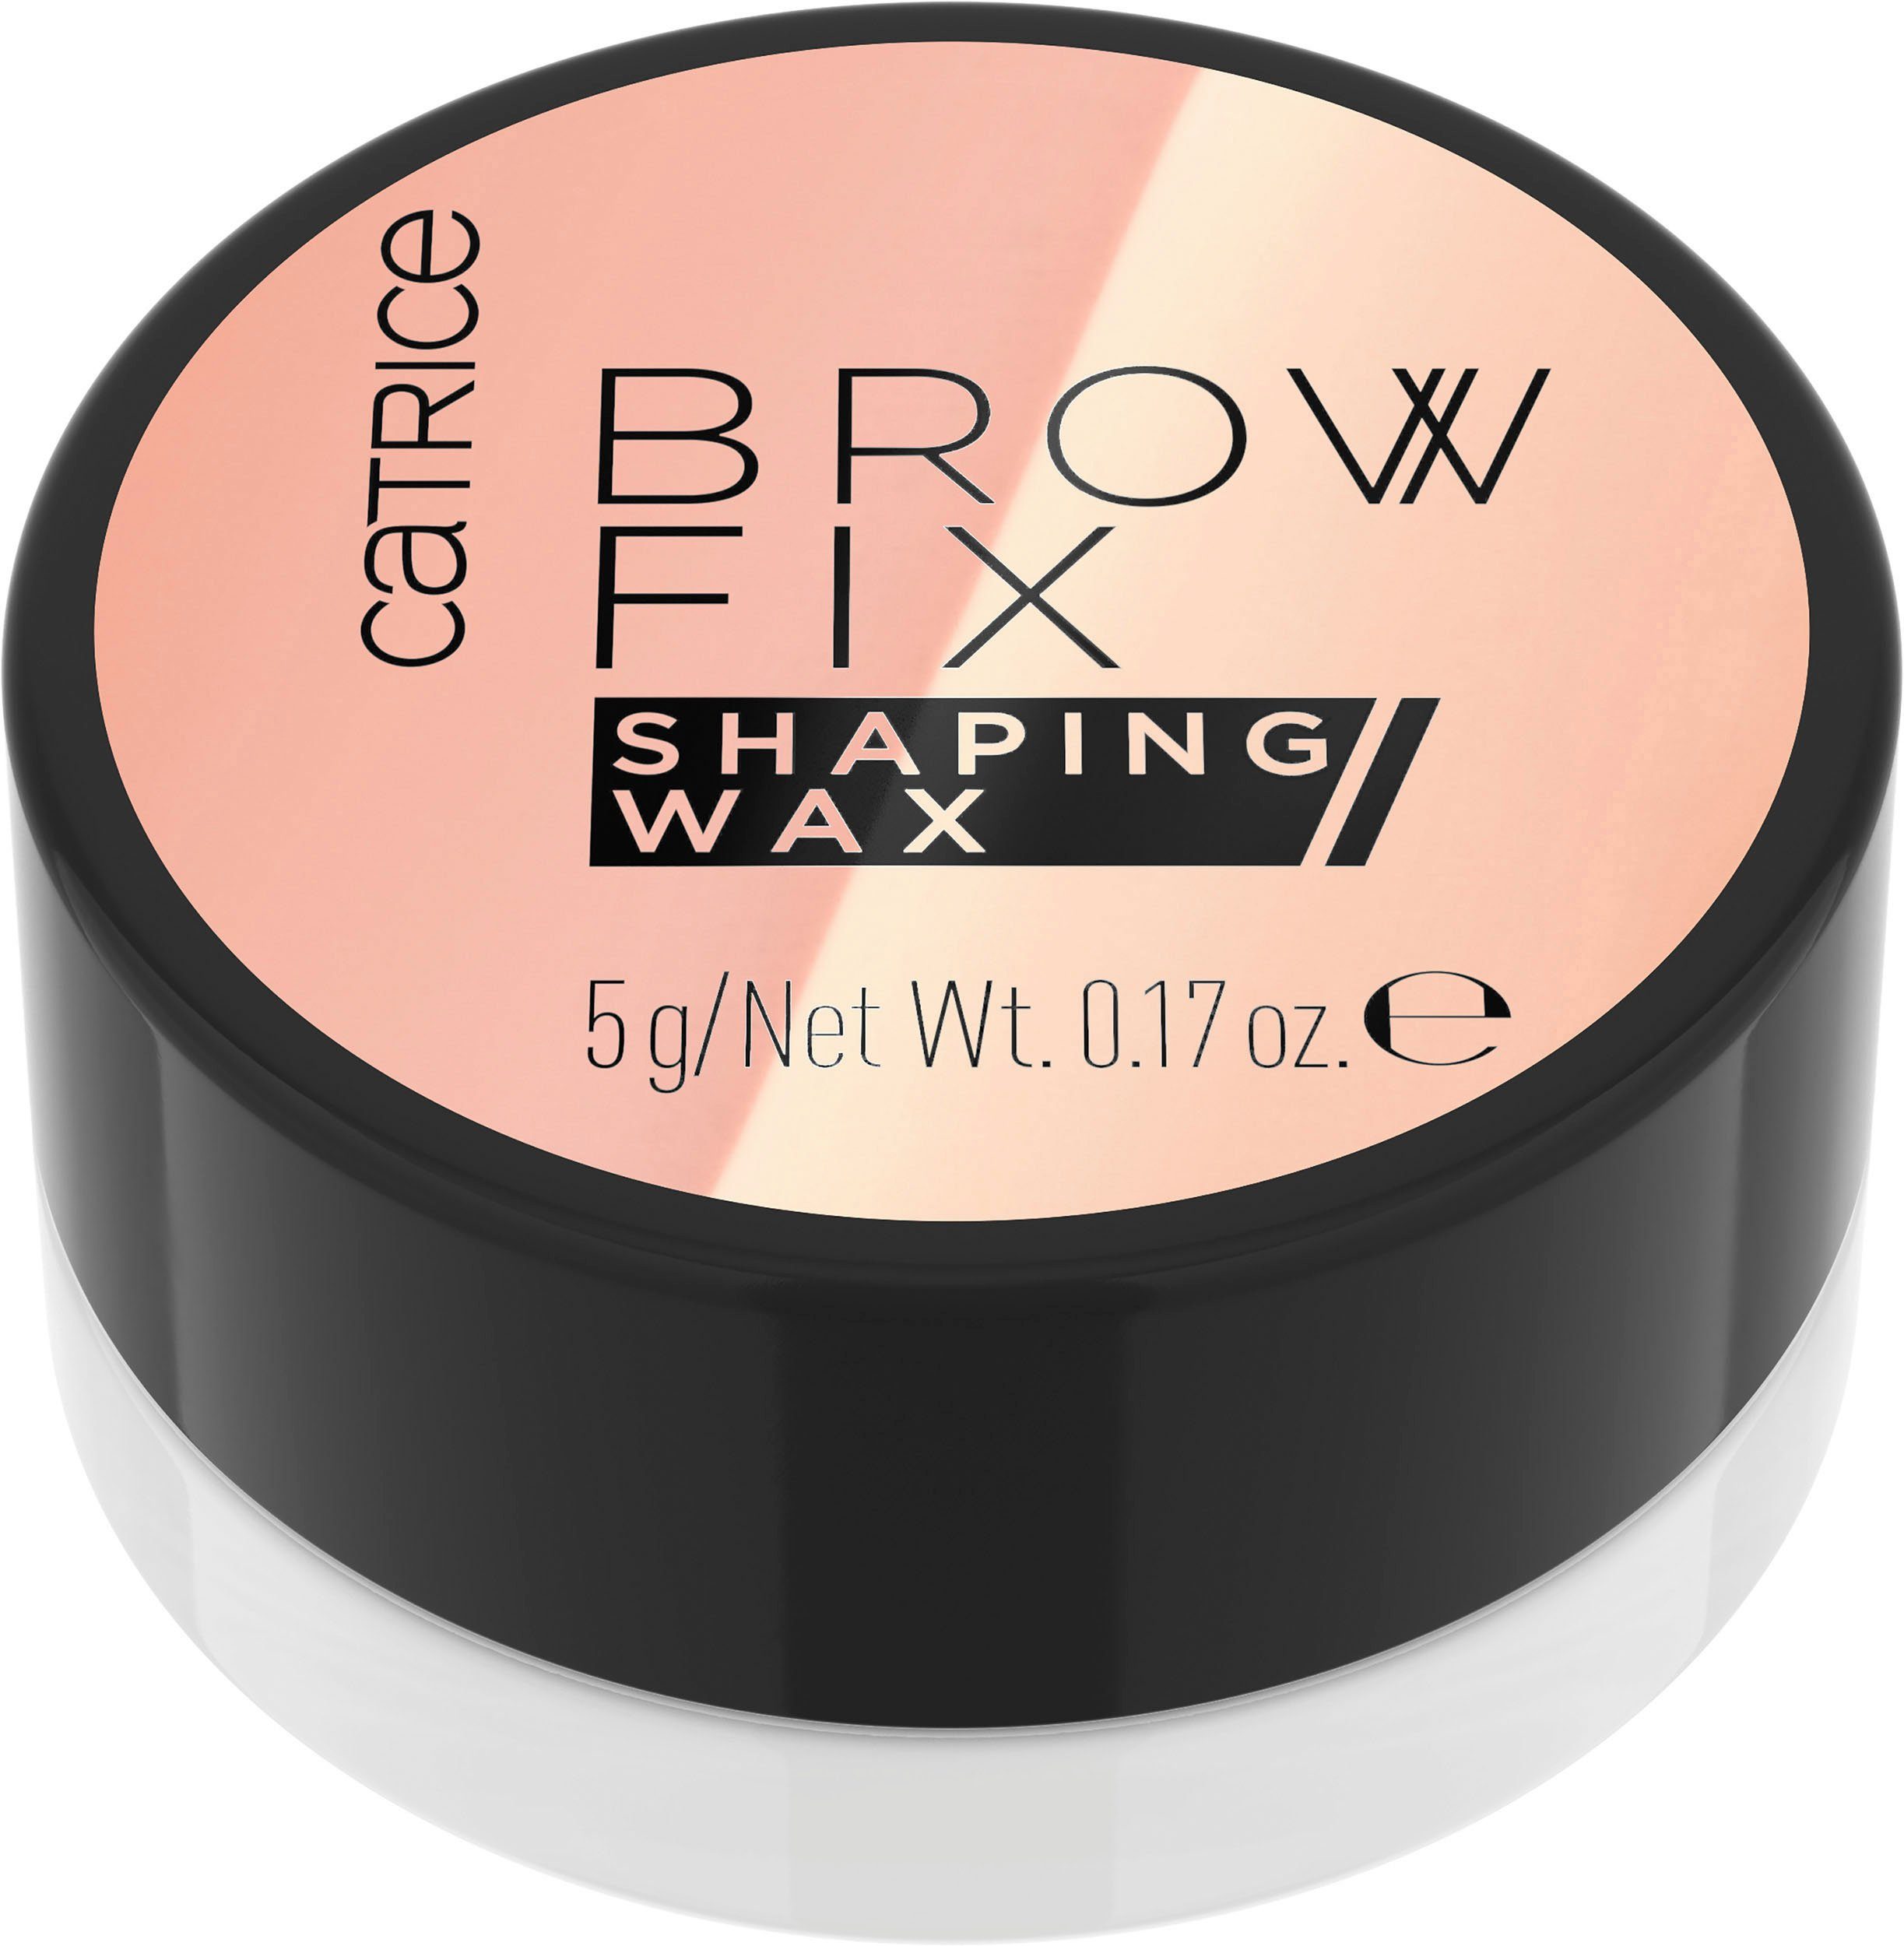 Catrice Augenbrauen-Gel Catrice Wax Fix Brow 010, 3-tlg. Shaping